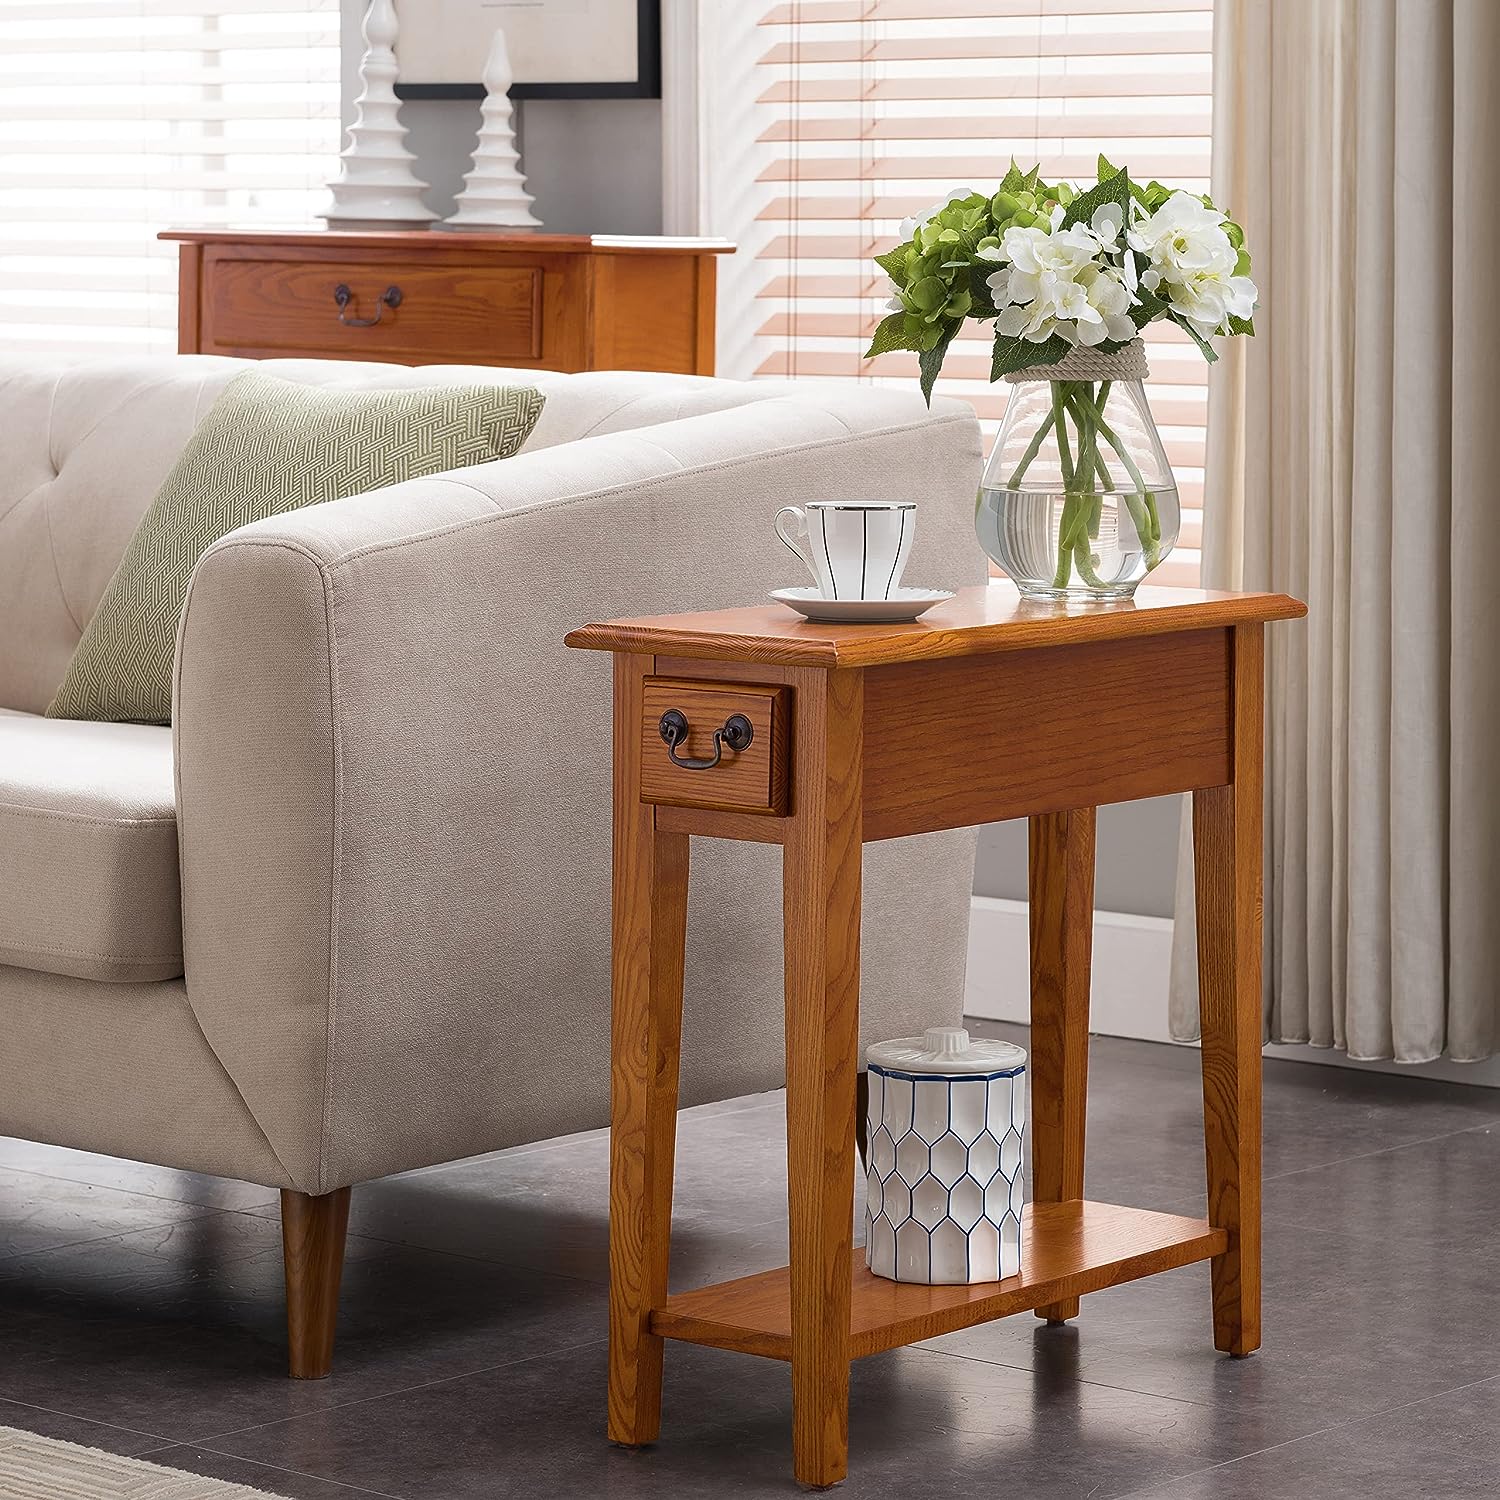 a classic slim end table next to a couch with an oak finish is perfect to add a farmhouse touch to this living space.